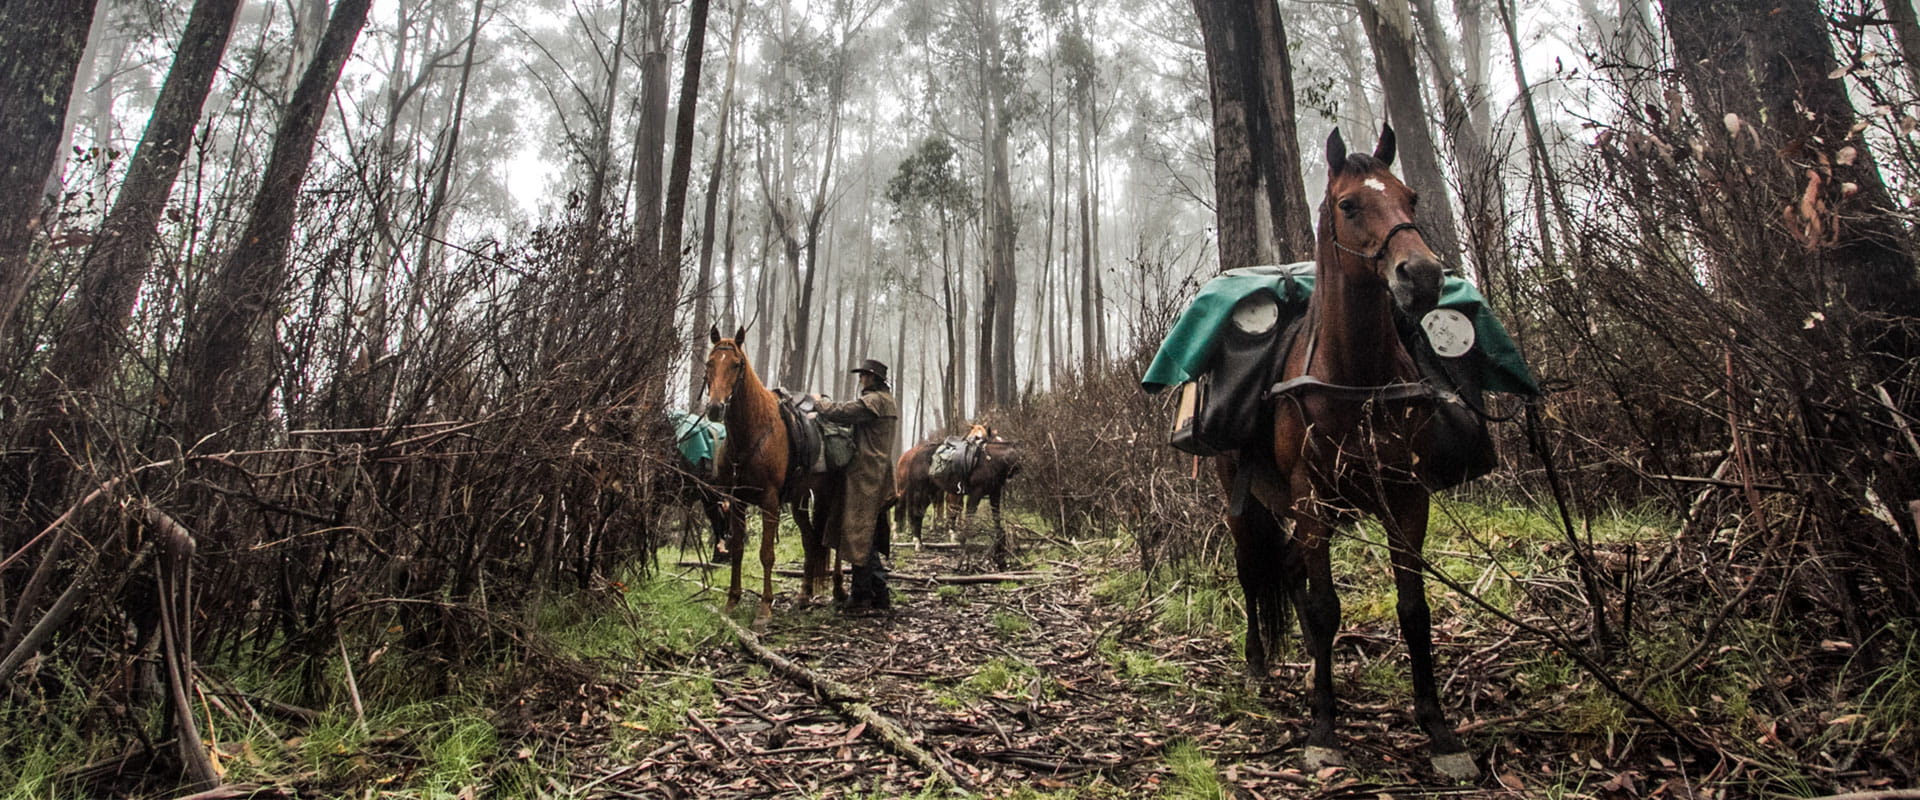 A man packs a a horse among tall eucalypts in a foggy forest setting